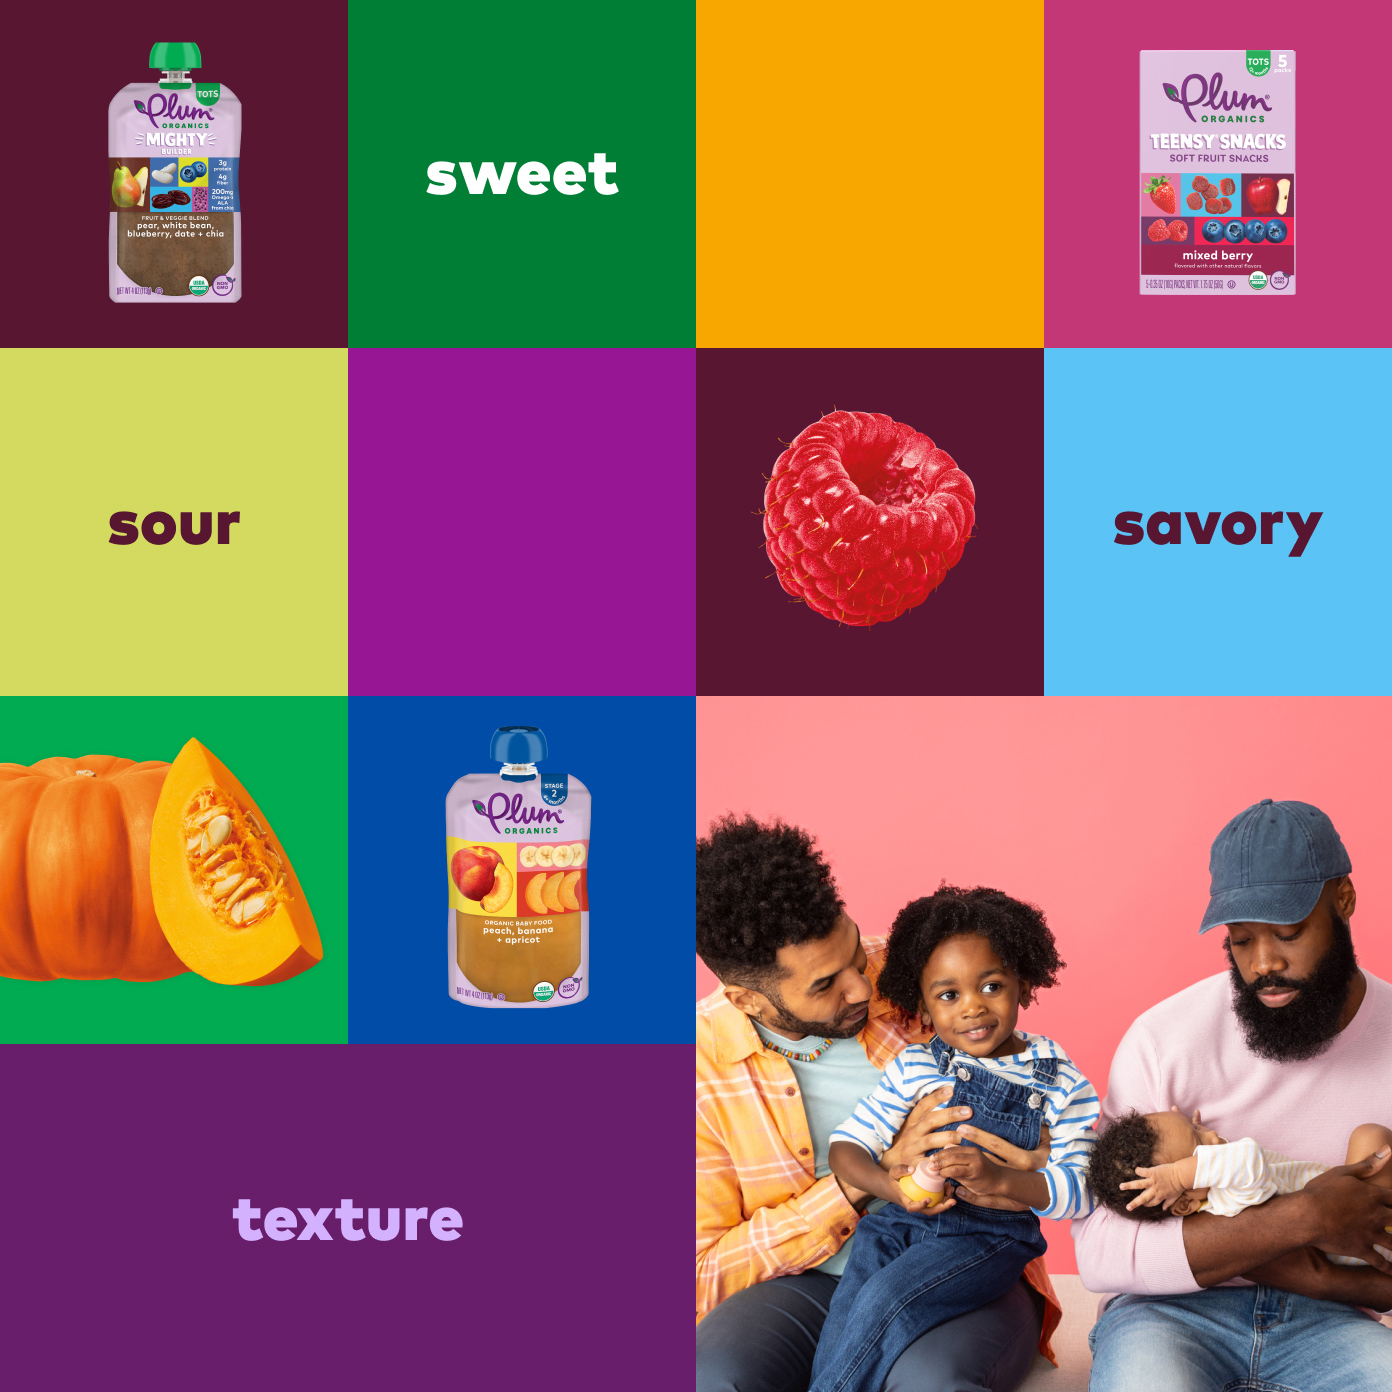 2 fathers with children collage surrounded by sweet, sour, and texture flavors